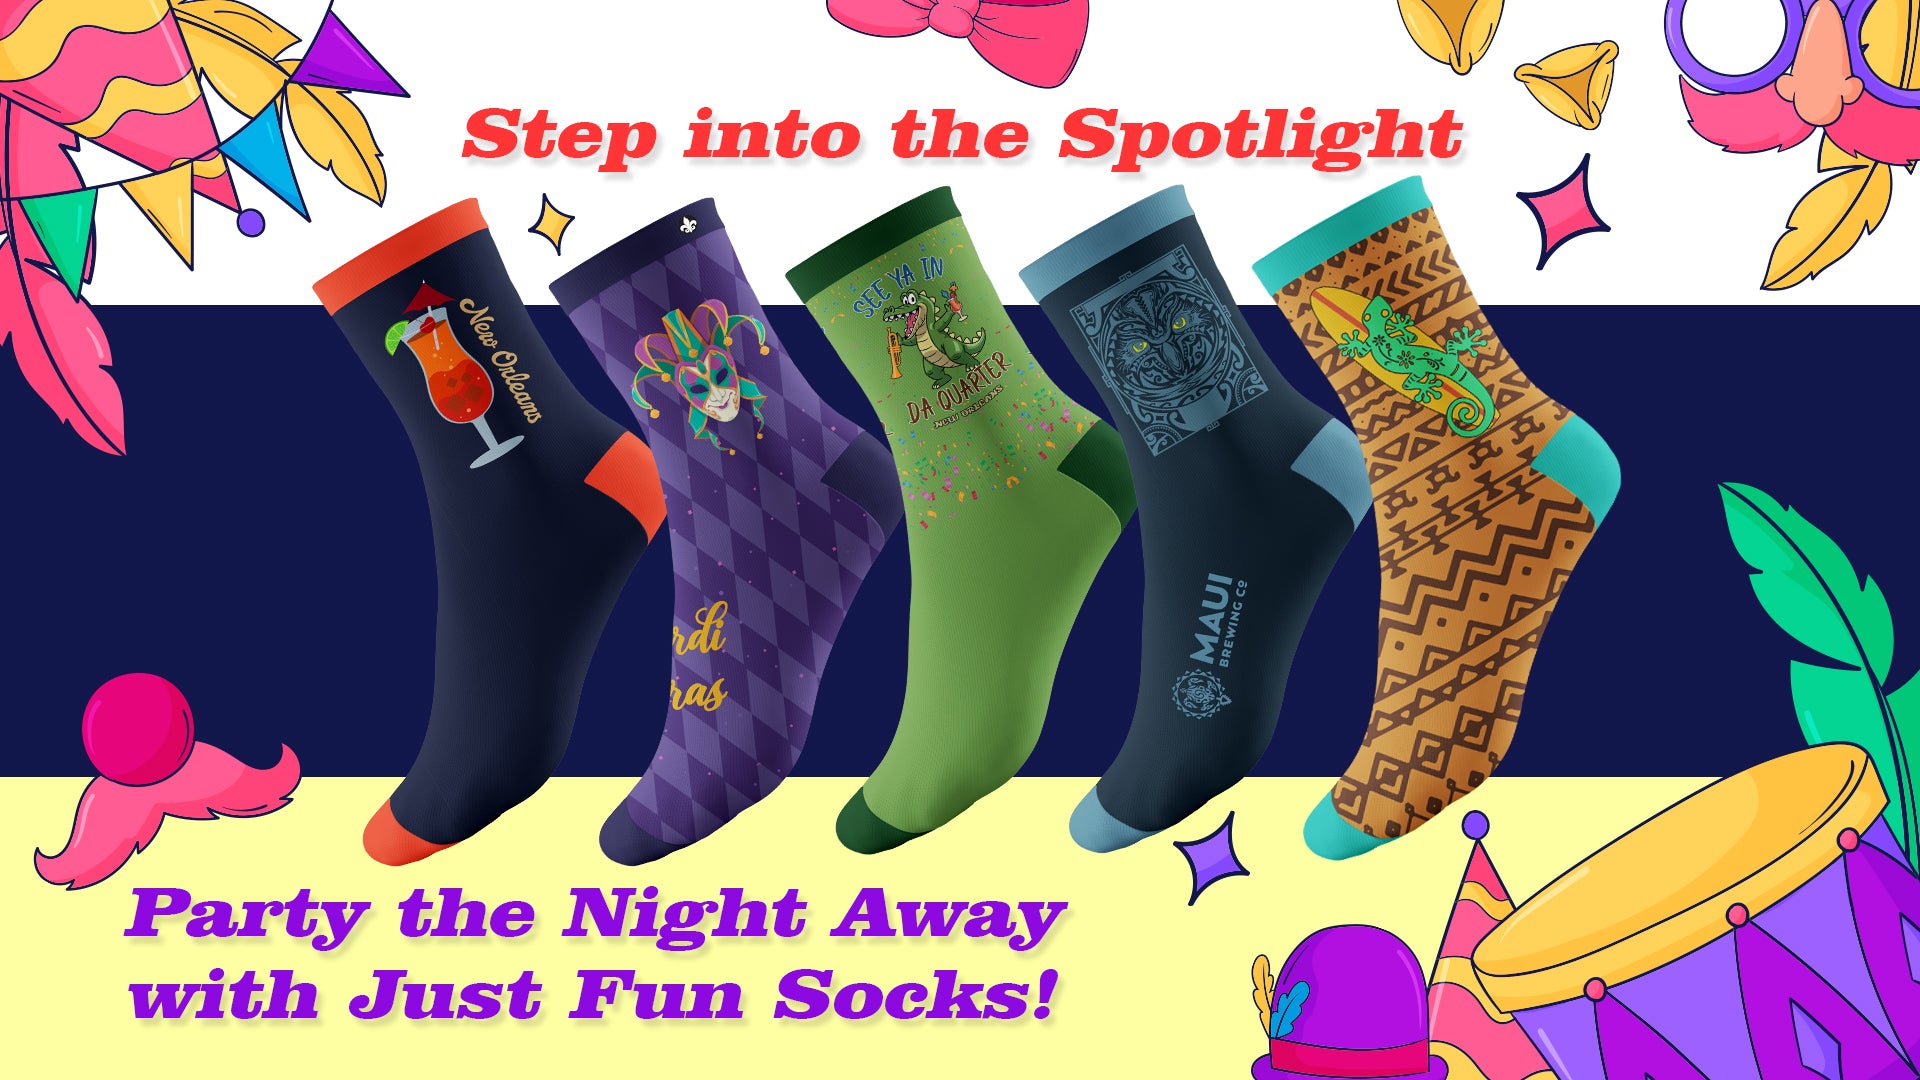 Step into the Spotlight: Party the Night Away with Just Fun Socks!